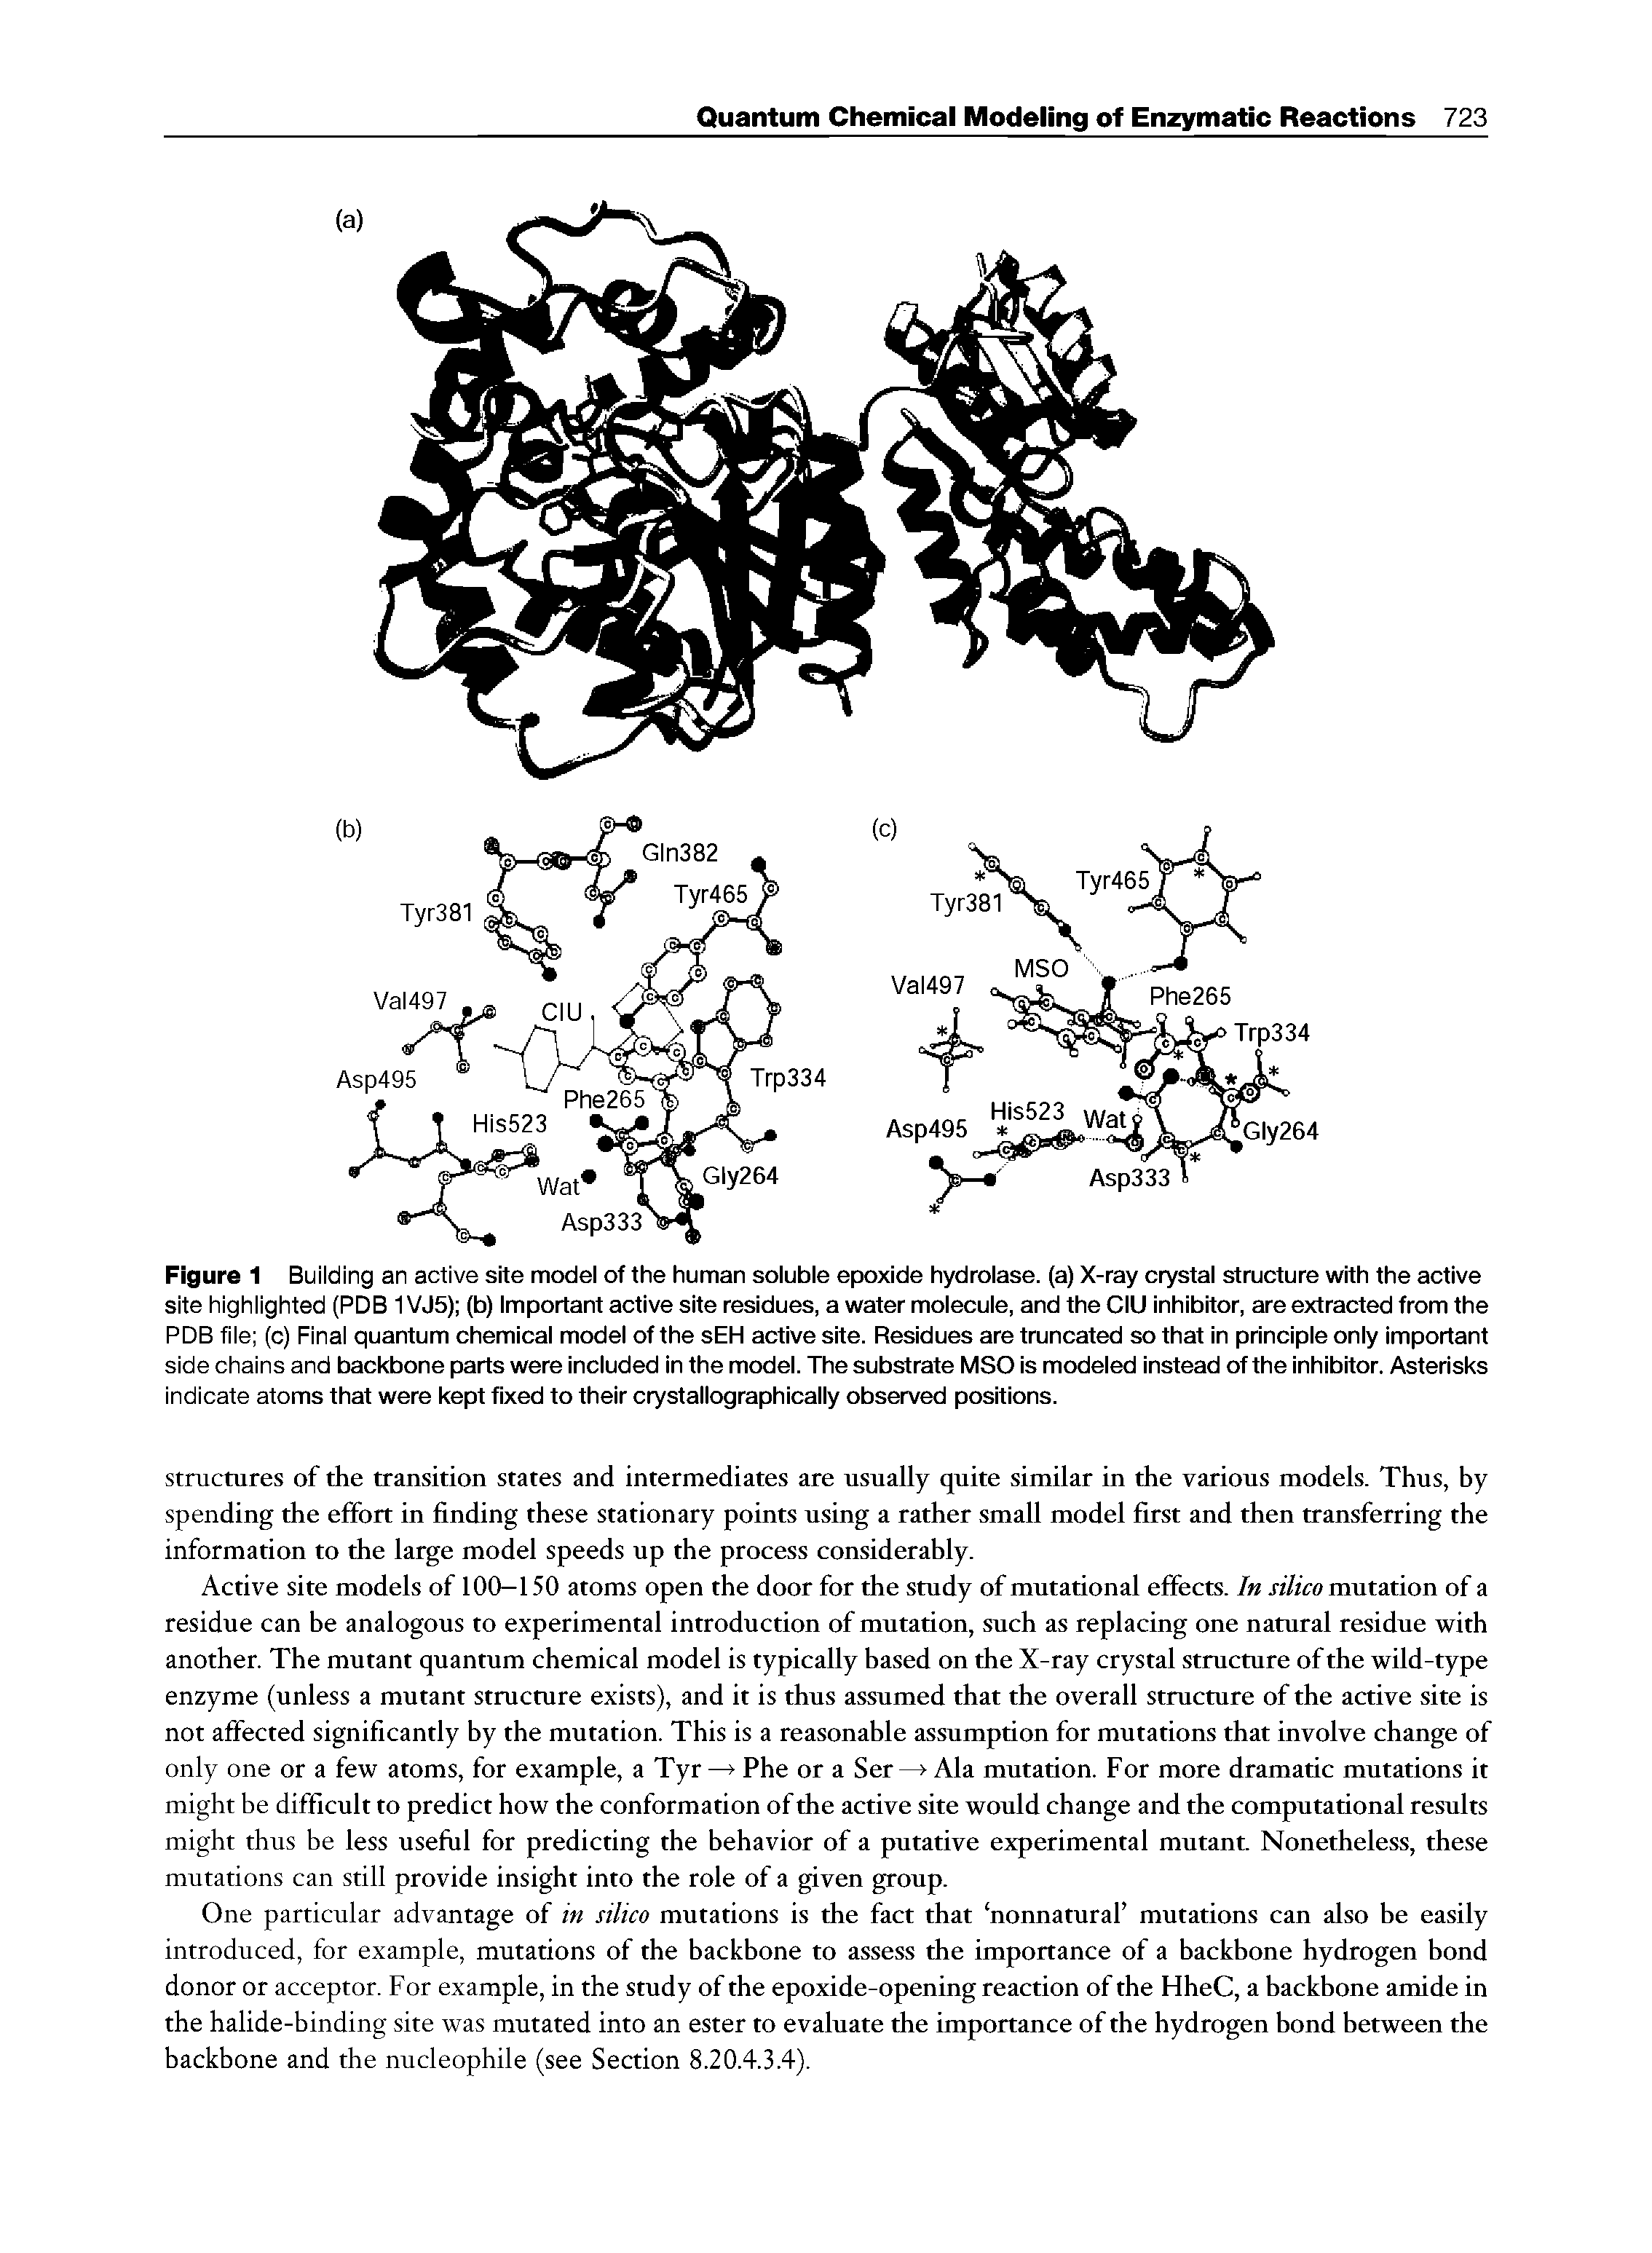 Figure 1 Building an active site model of the human soluble epoxide hydrolase, (a) X-ray crystal structure with the active site highlighted (PDB 1VJ5) (b) Important active site residues, a water molecule, and the CIU inhibitor, are extracted from the PDB file (c) Final quantum chemical model of the sEH active site. Residues are truncated so that in principle only important side chains and backbone parts were included in the model. The substrate MSO is modeled instead of the inhibitor. Asterisks indicate atoms that were kept fixed to their crystallographically observed positions.